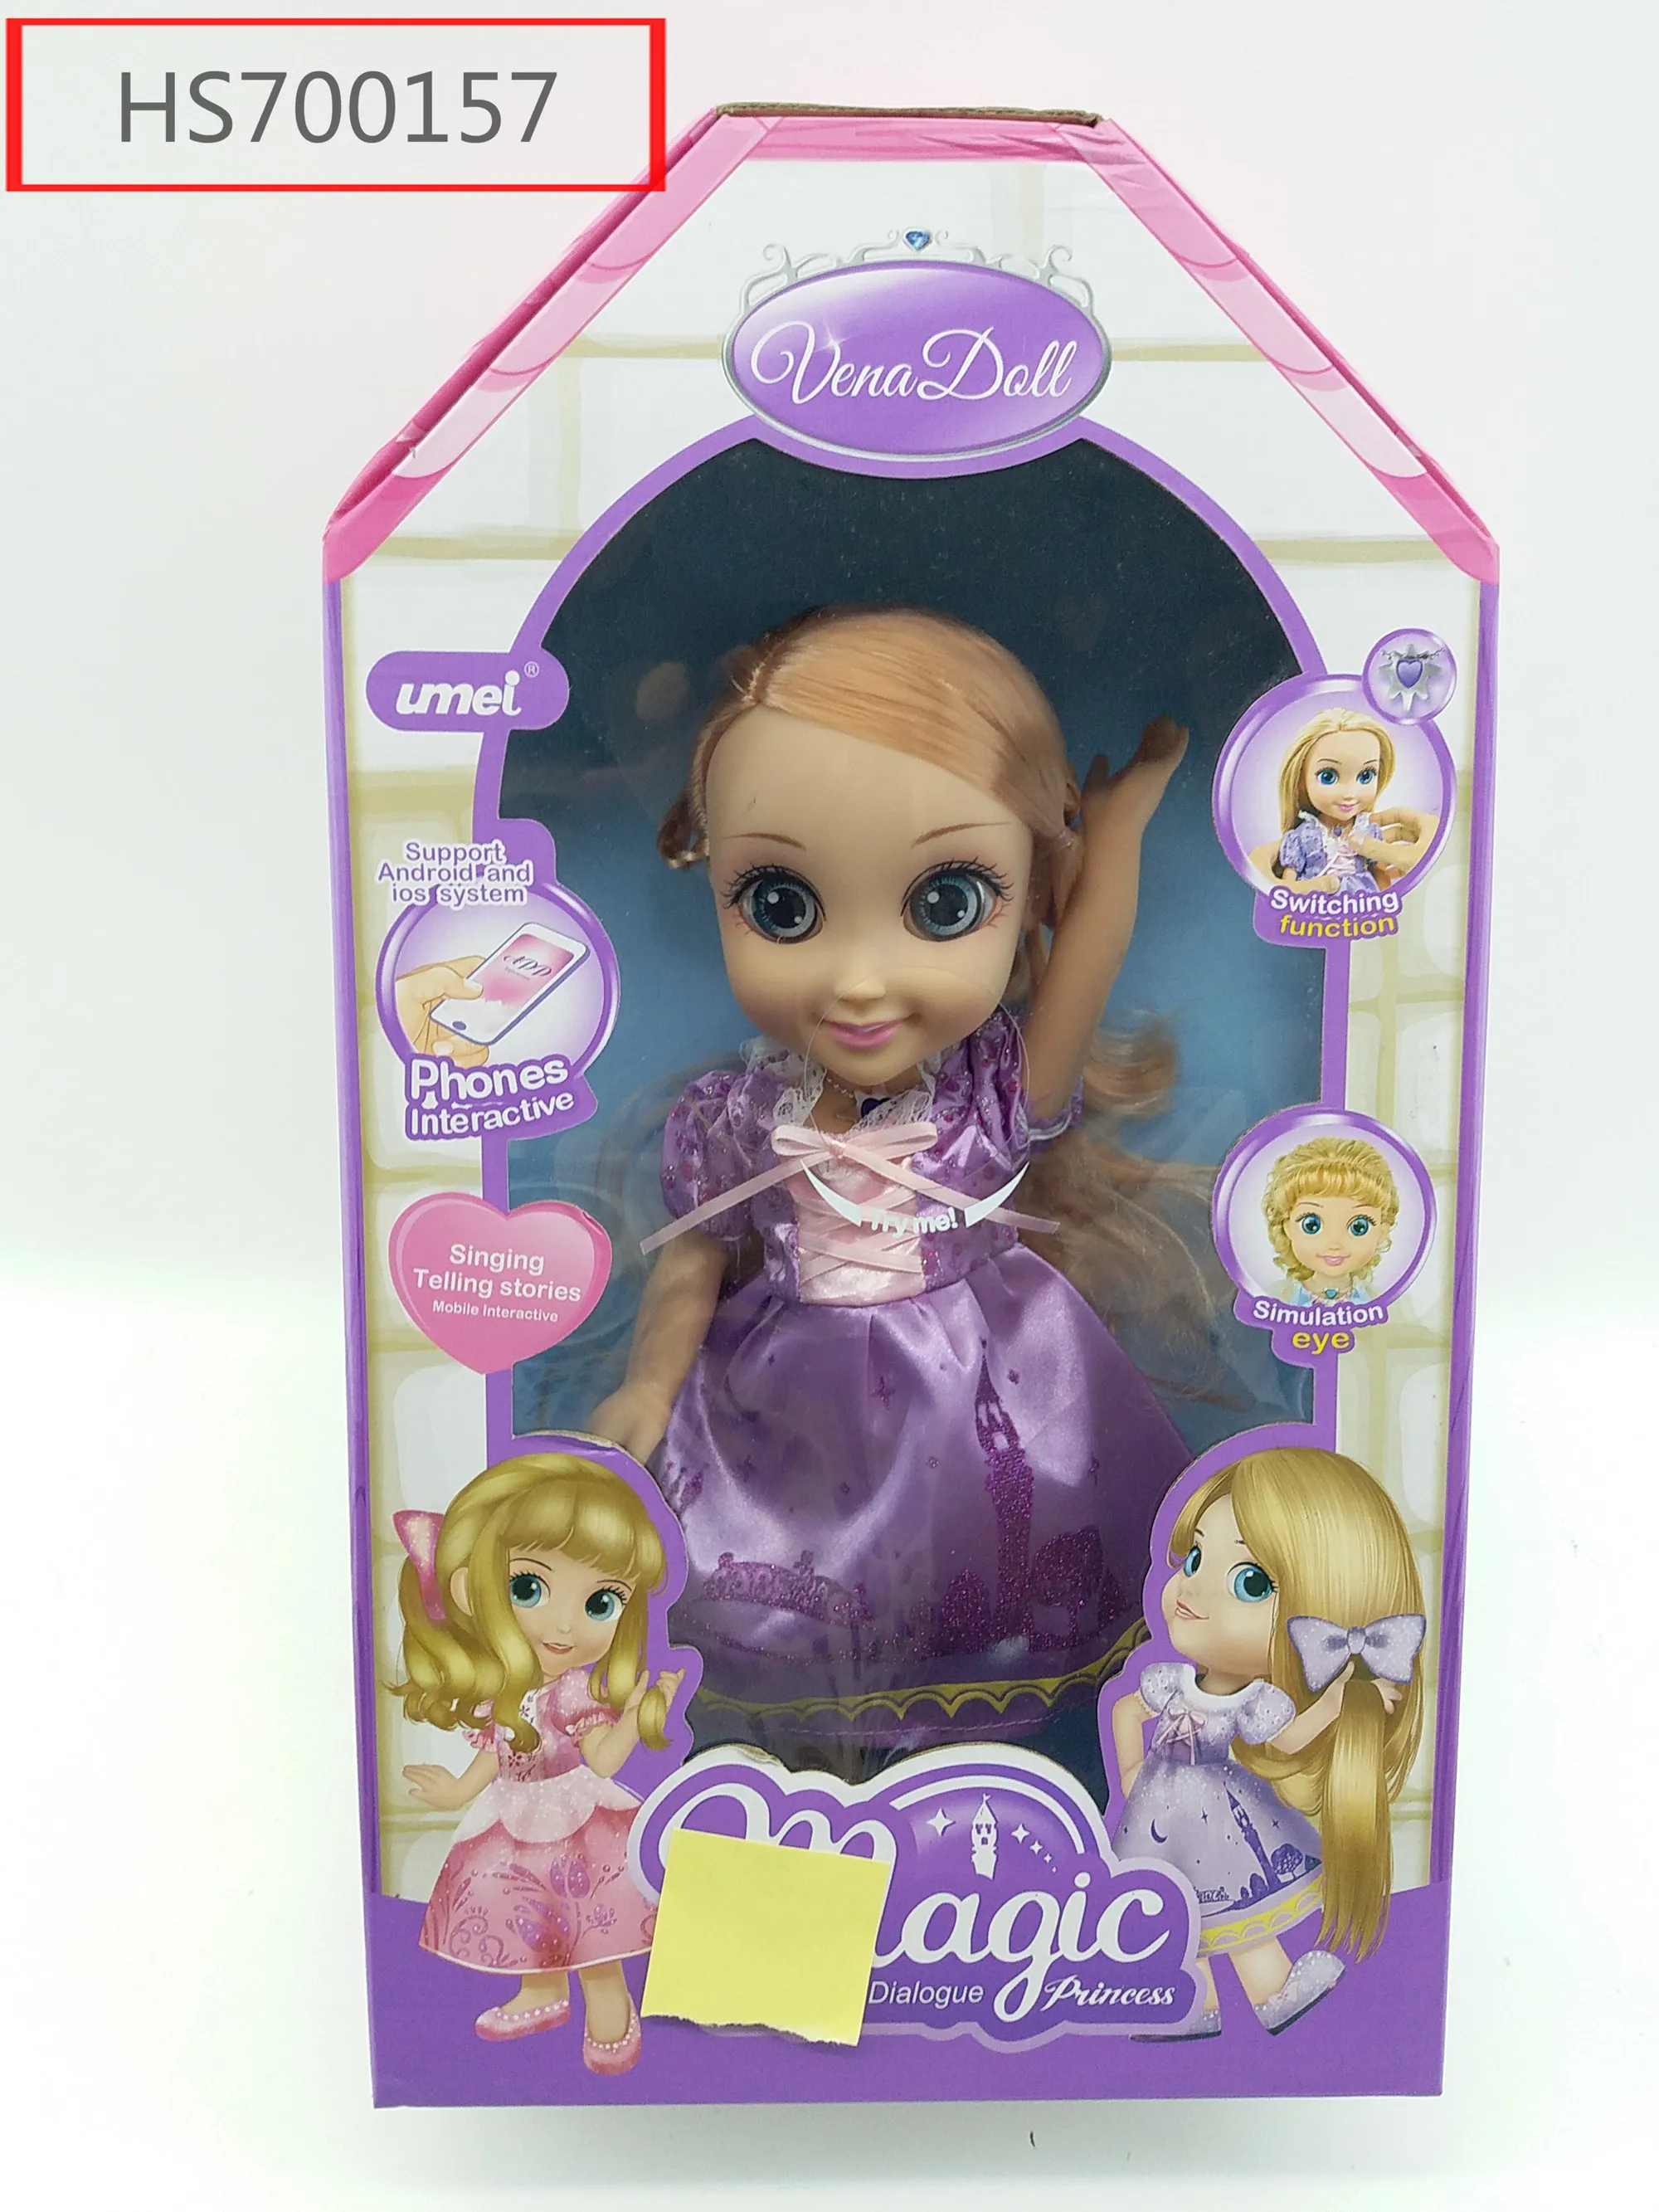 HS700157, Huwsin Toys, Music&storys, Doll